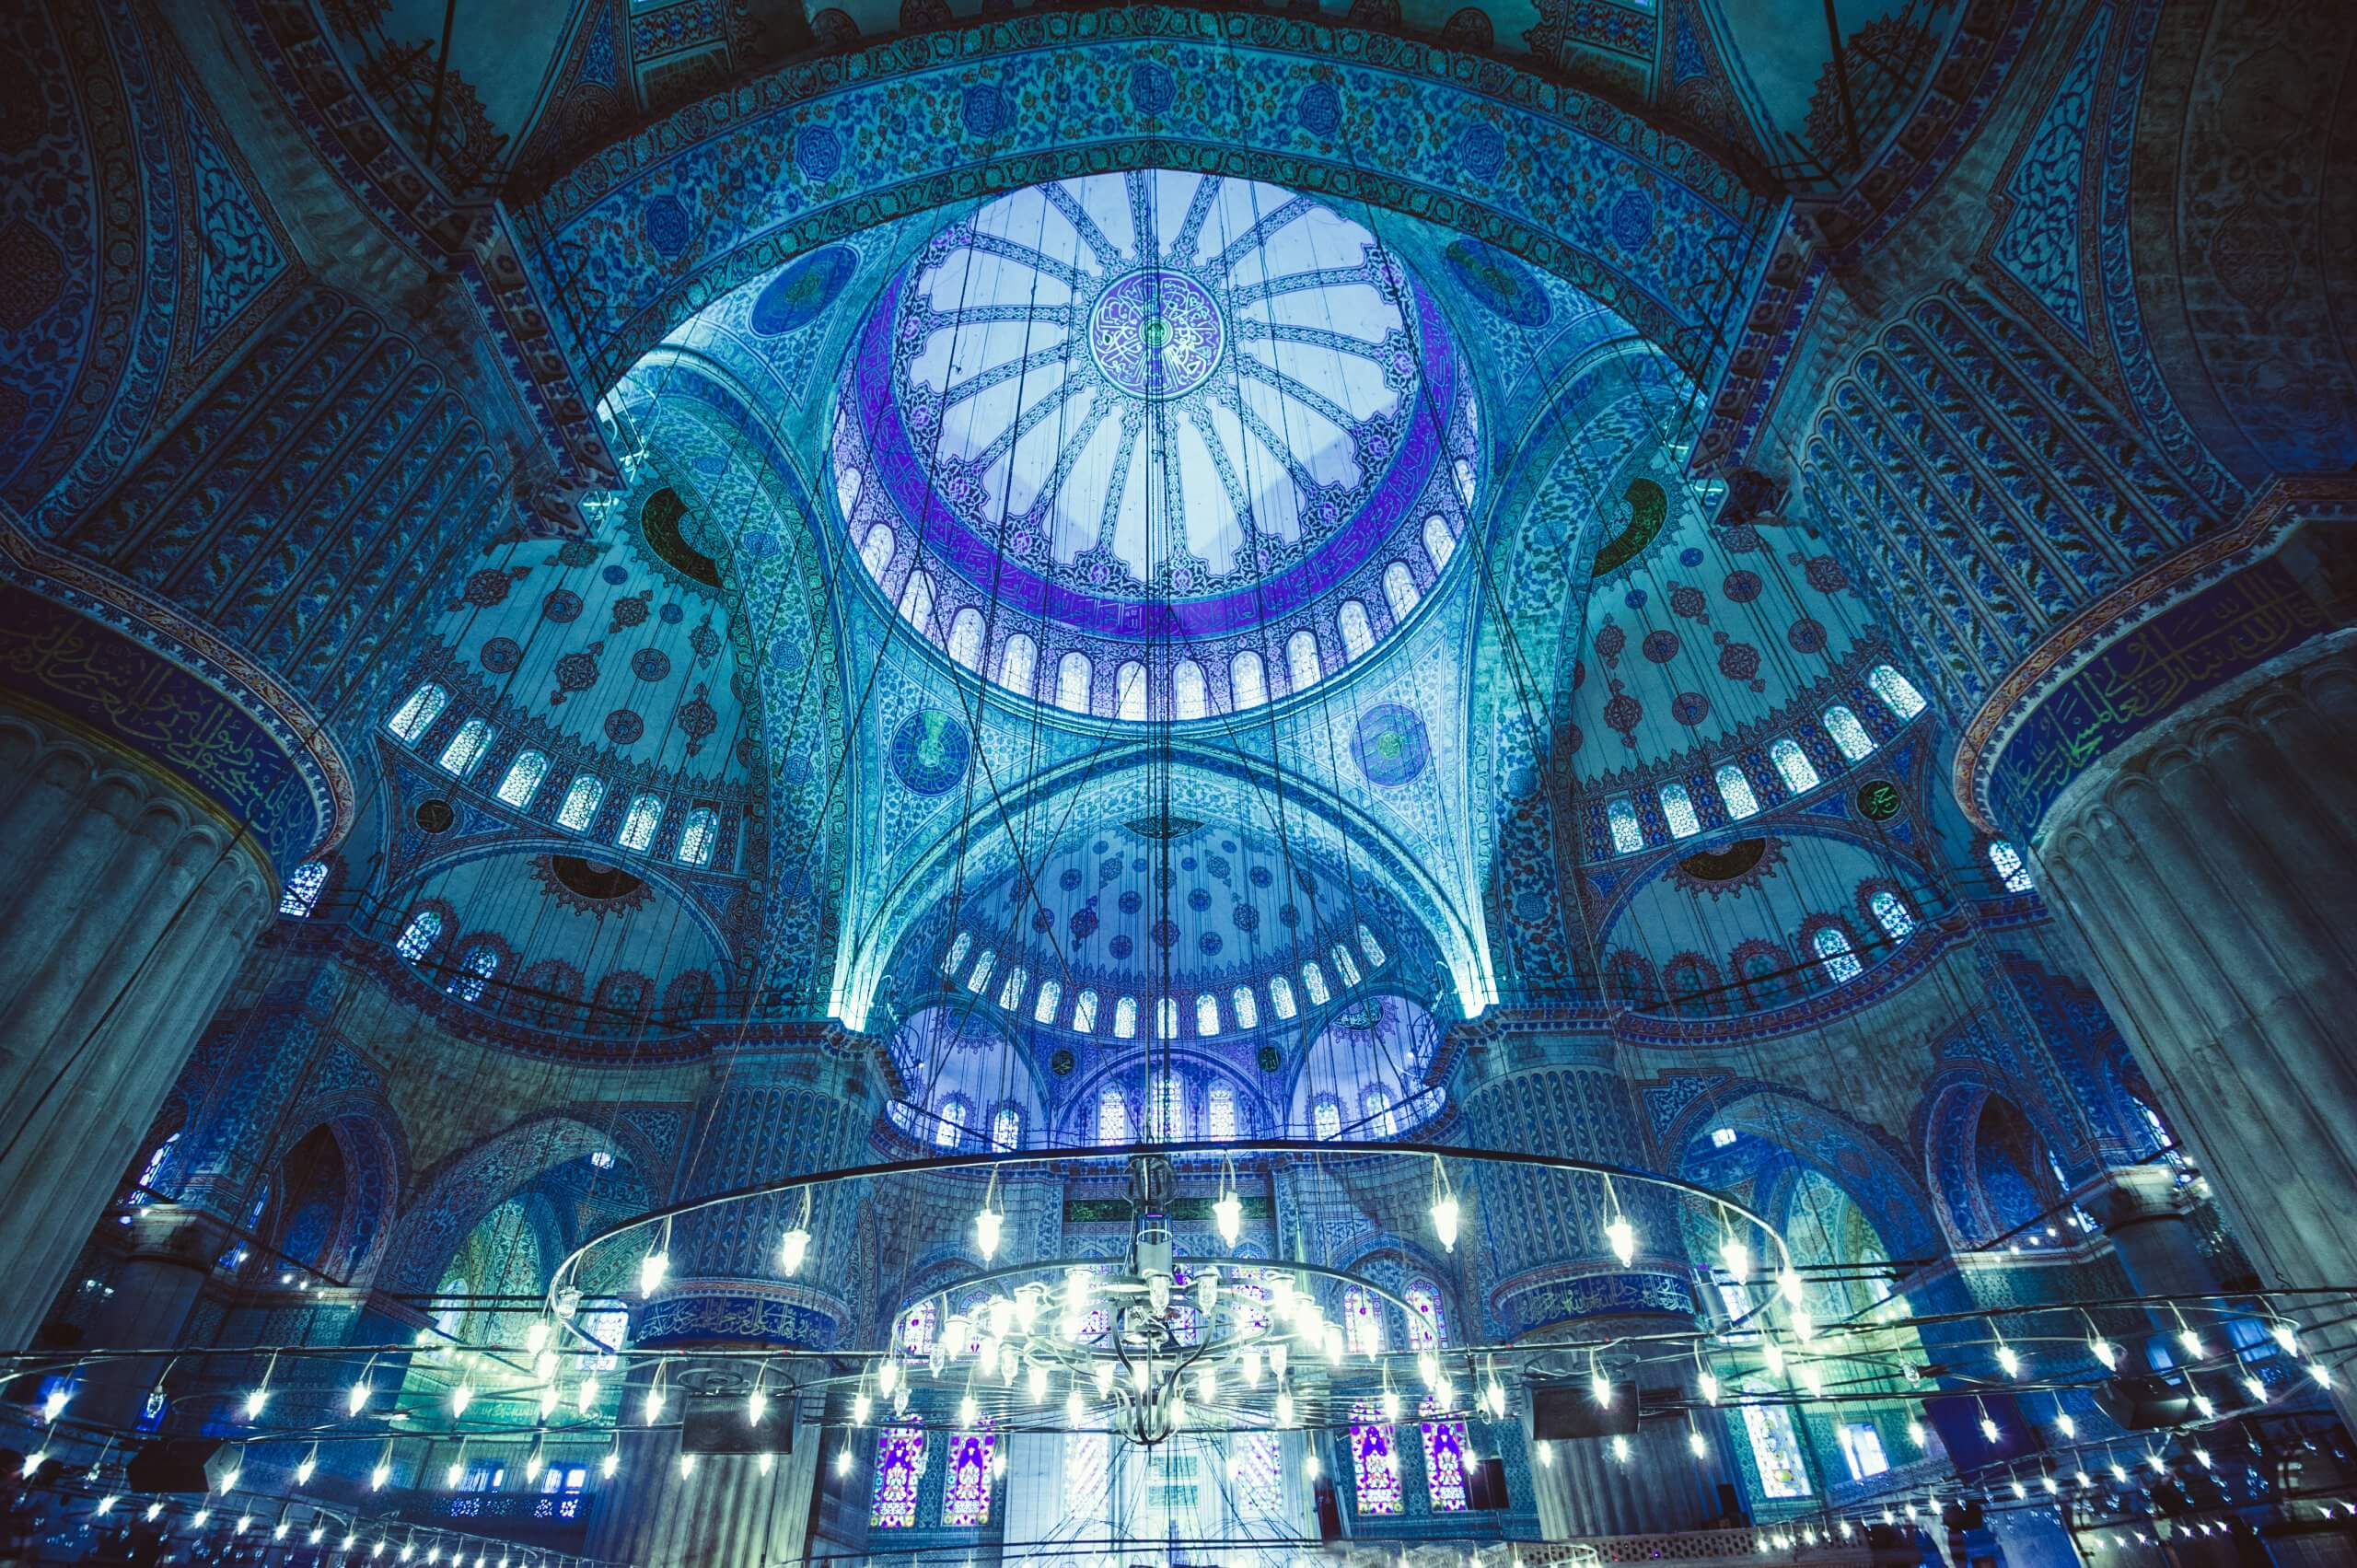 Ornately decorated interior of domes of the Blue Mosque in Istanbul, Turkey